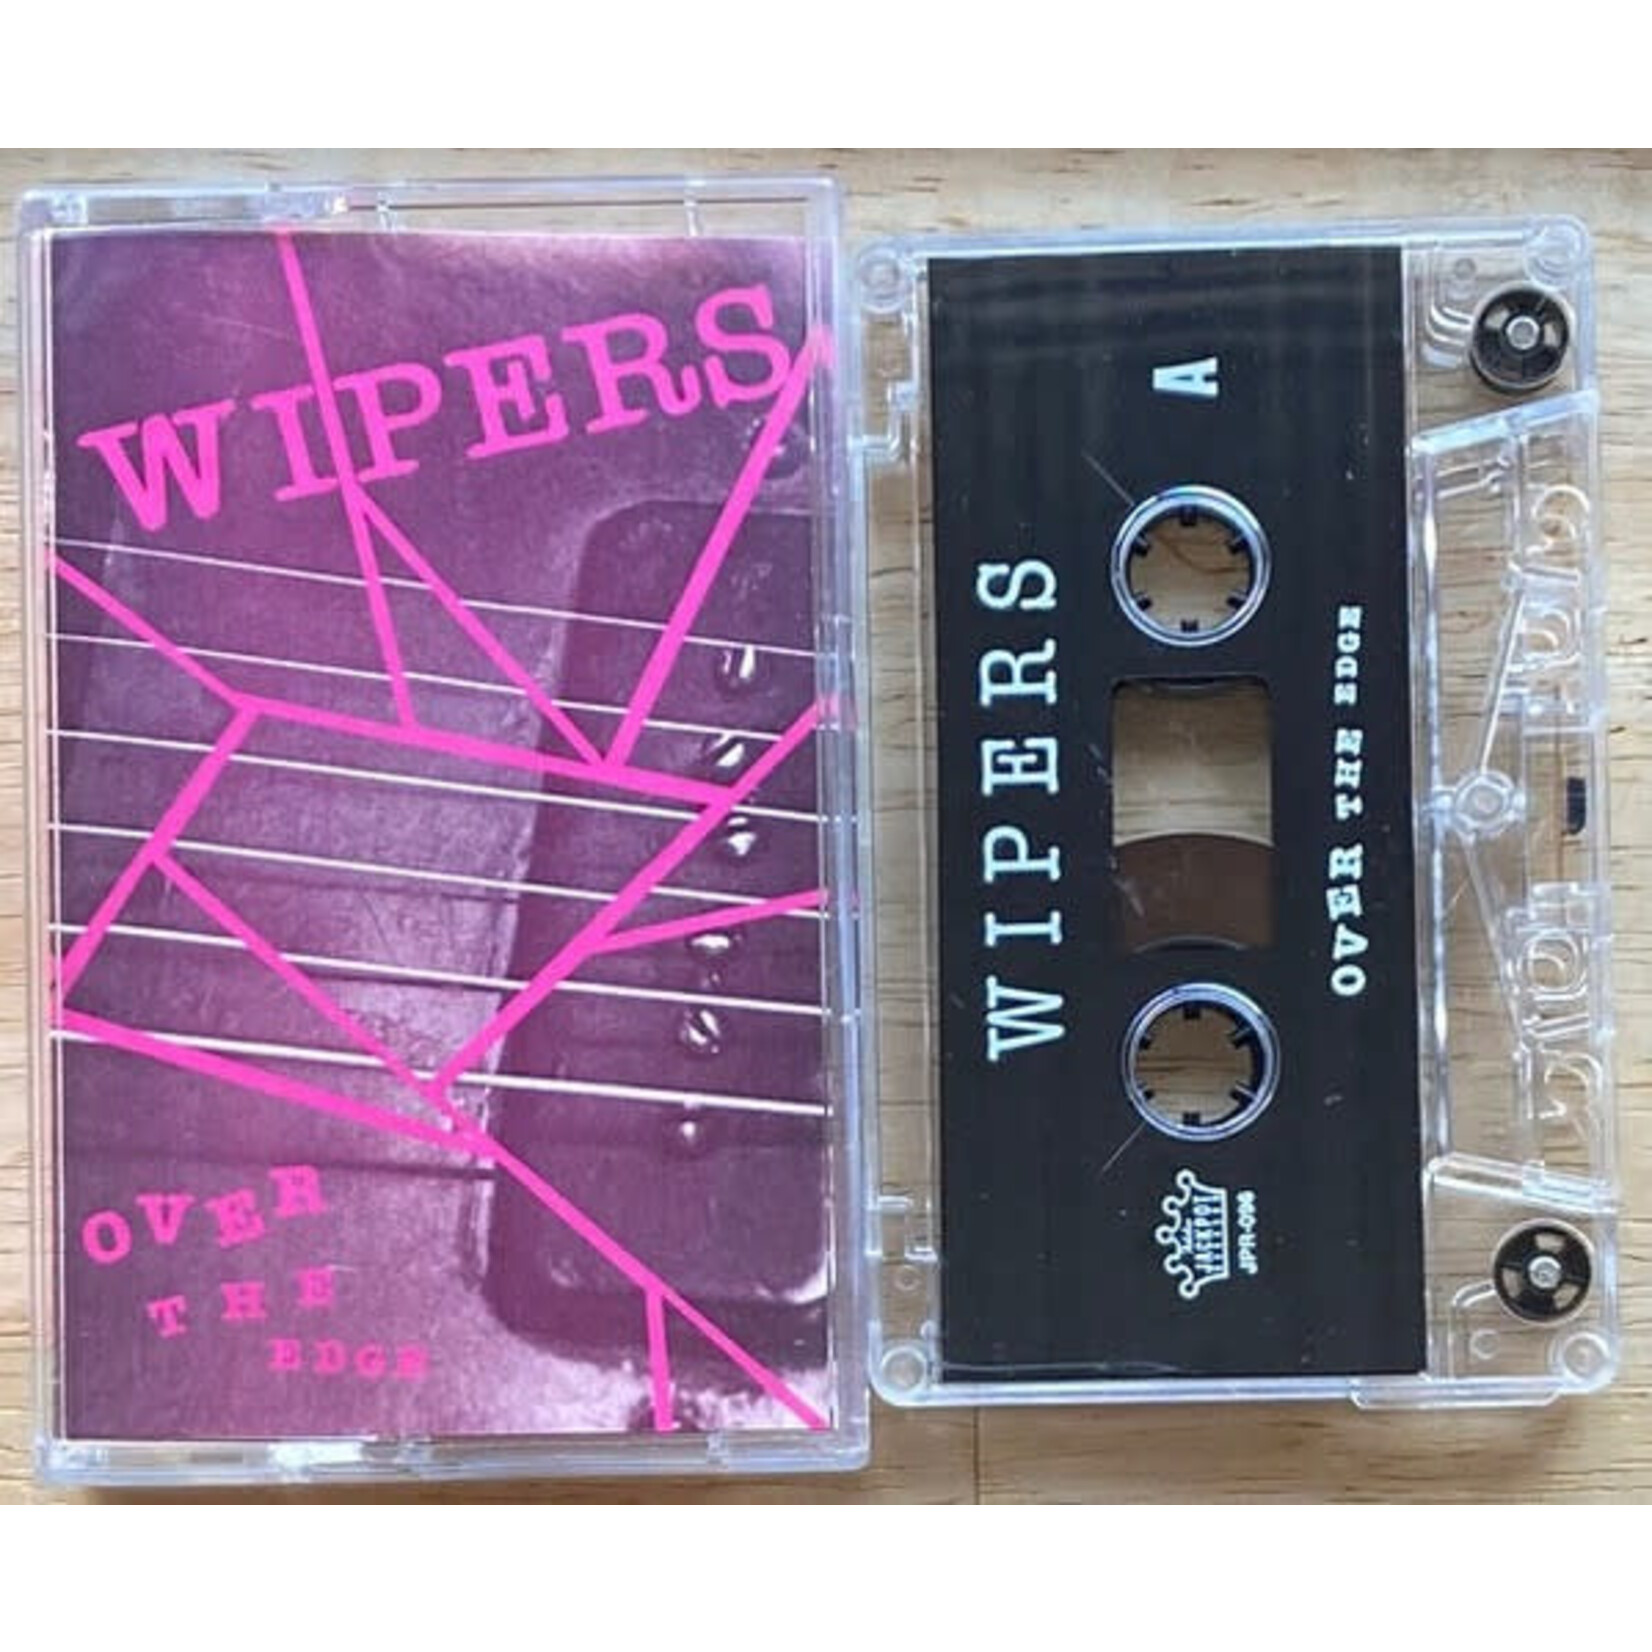 Jackpot Wipers - Over The Edge (Tape)